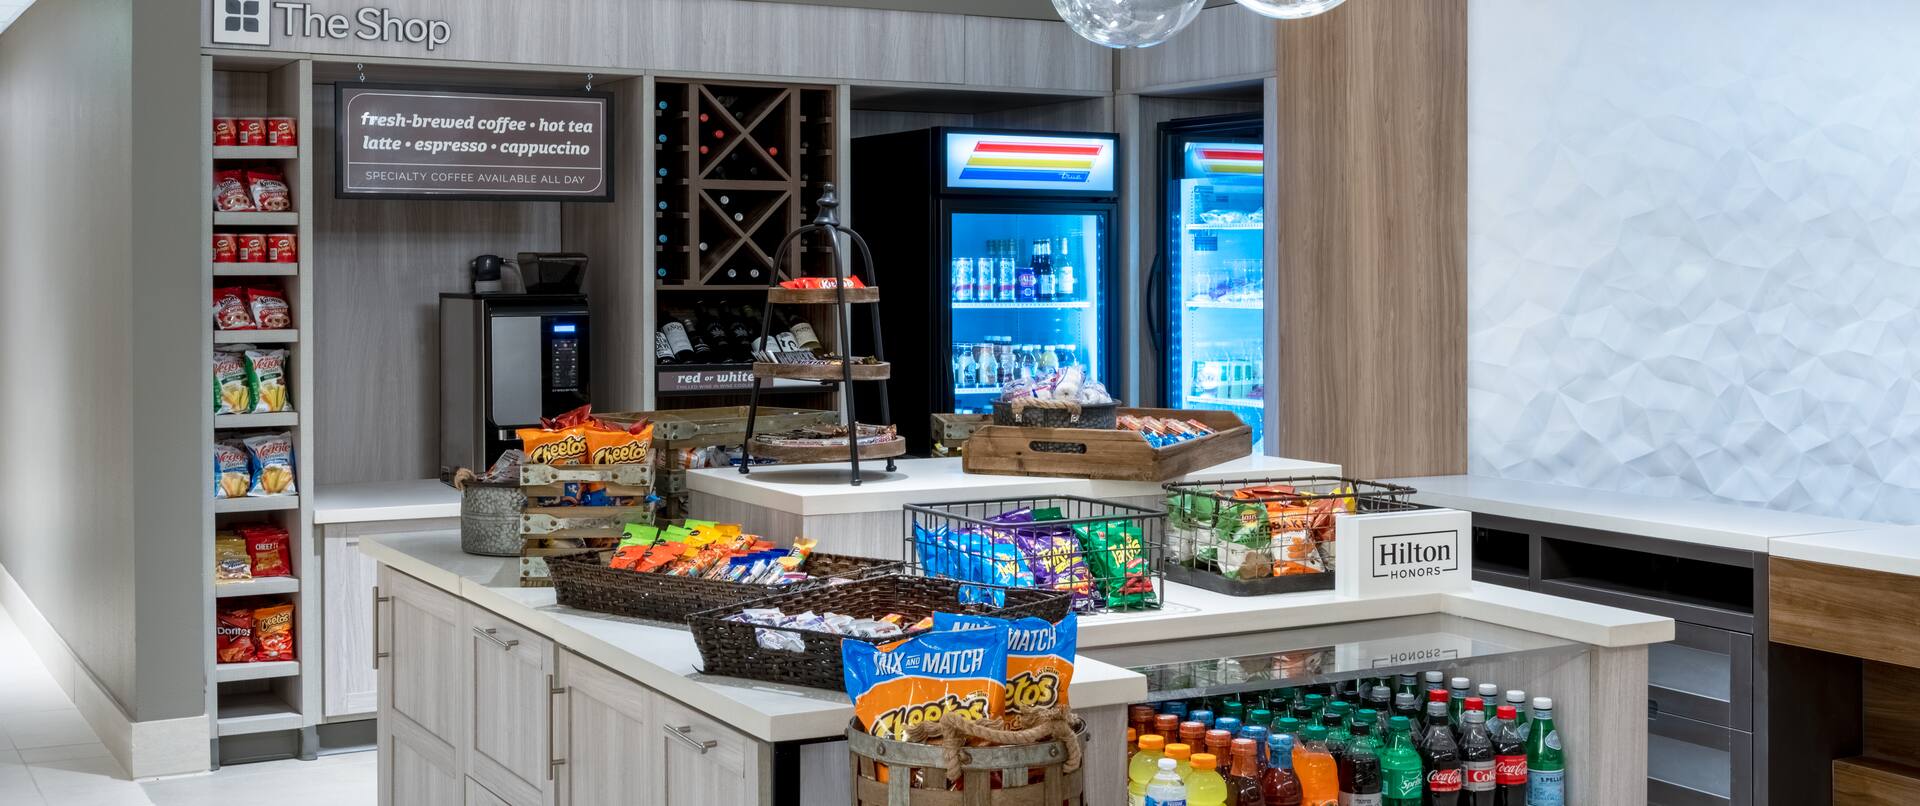 The Shop with Snacks and Cold Drinks